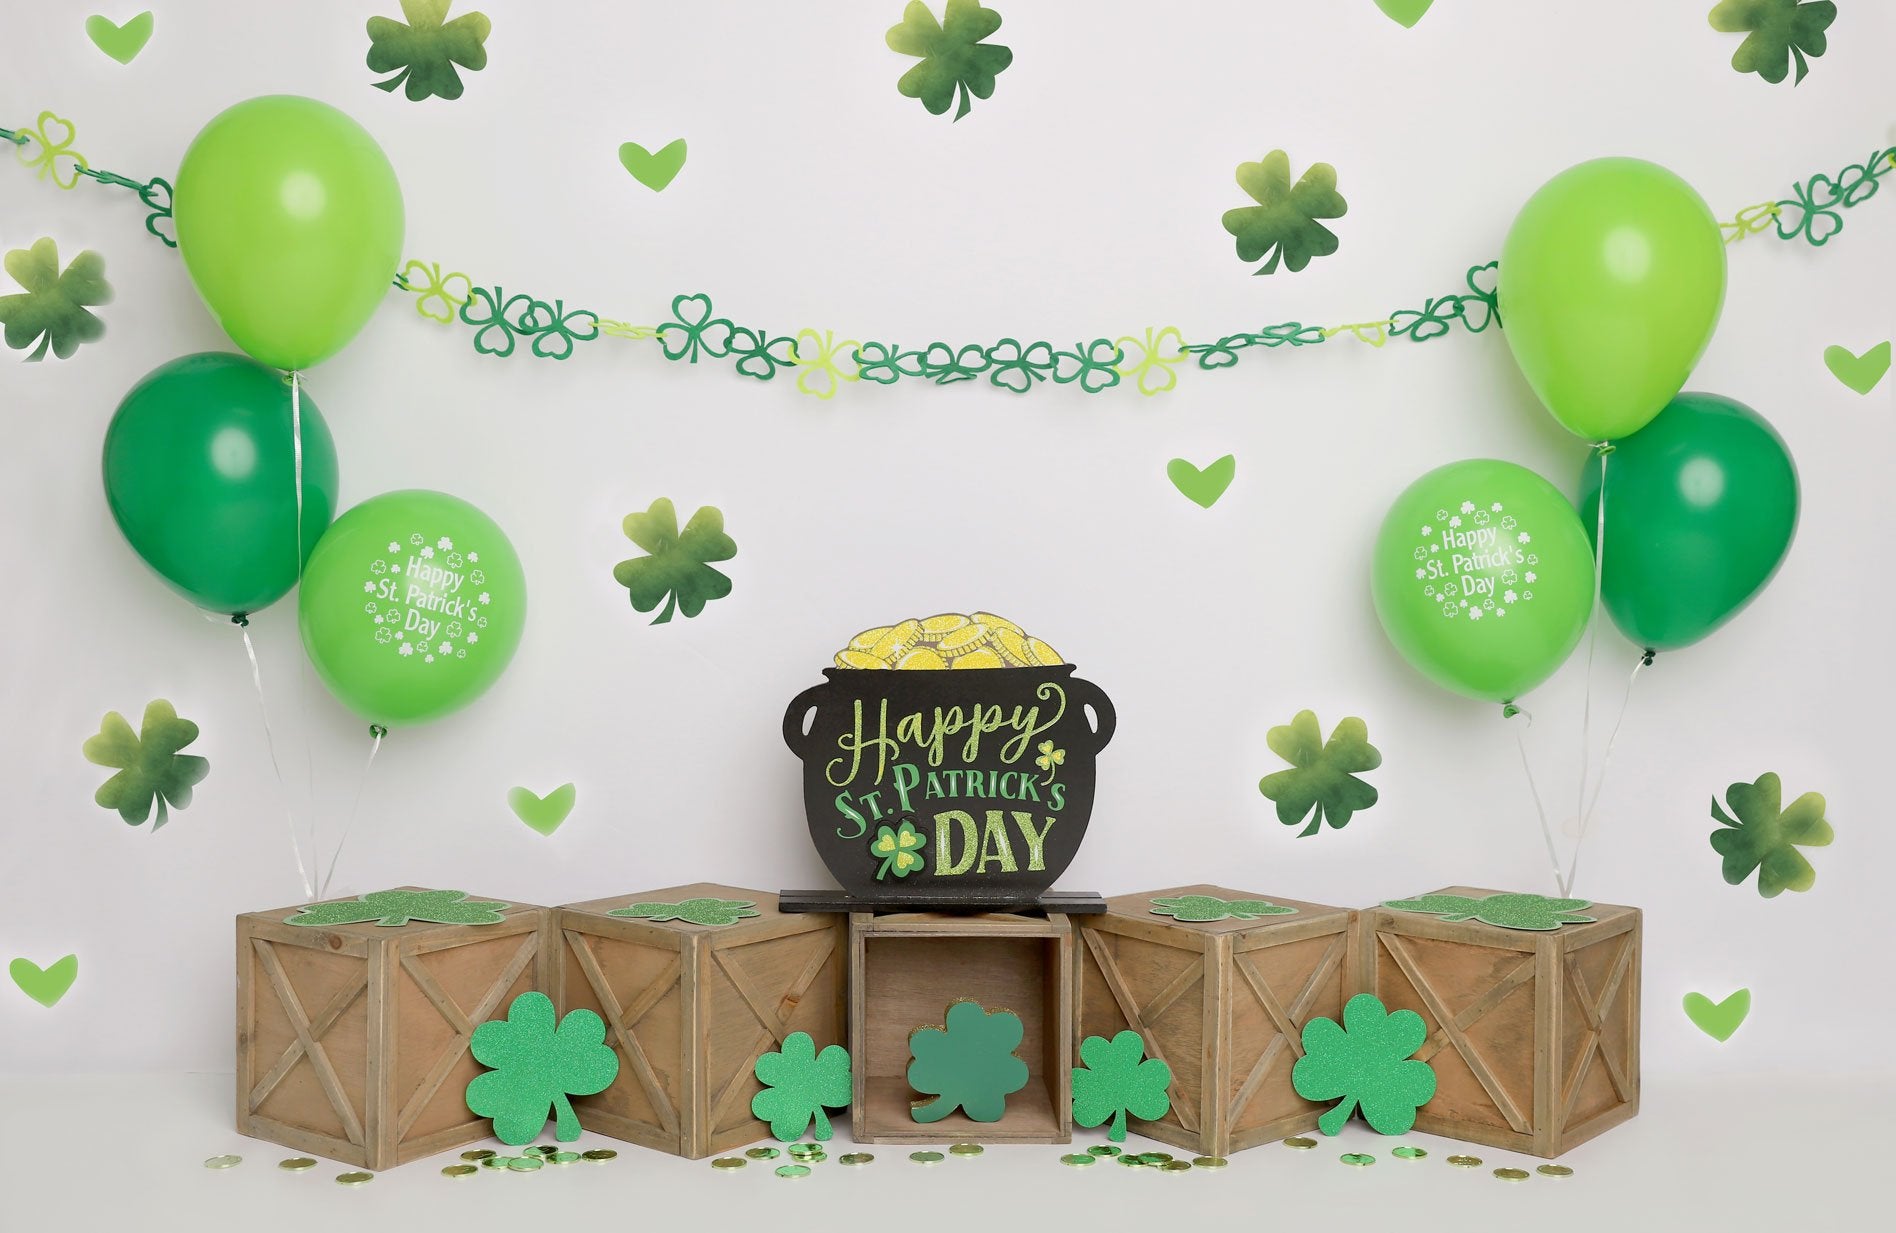 Kate St.patricks Day Green Party Backdrop Designed by Melissa King